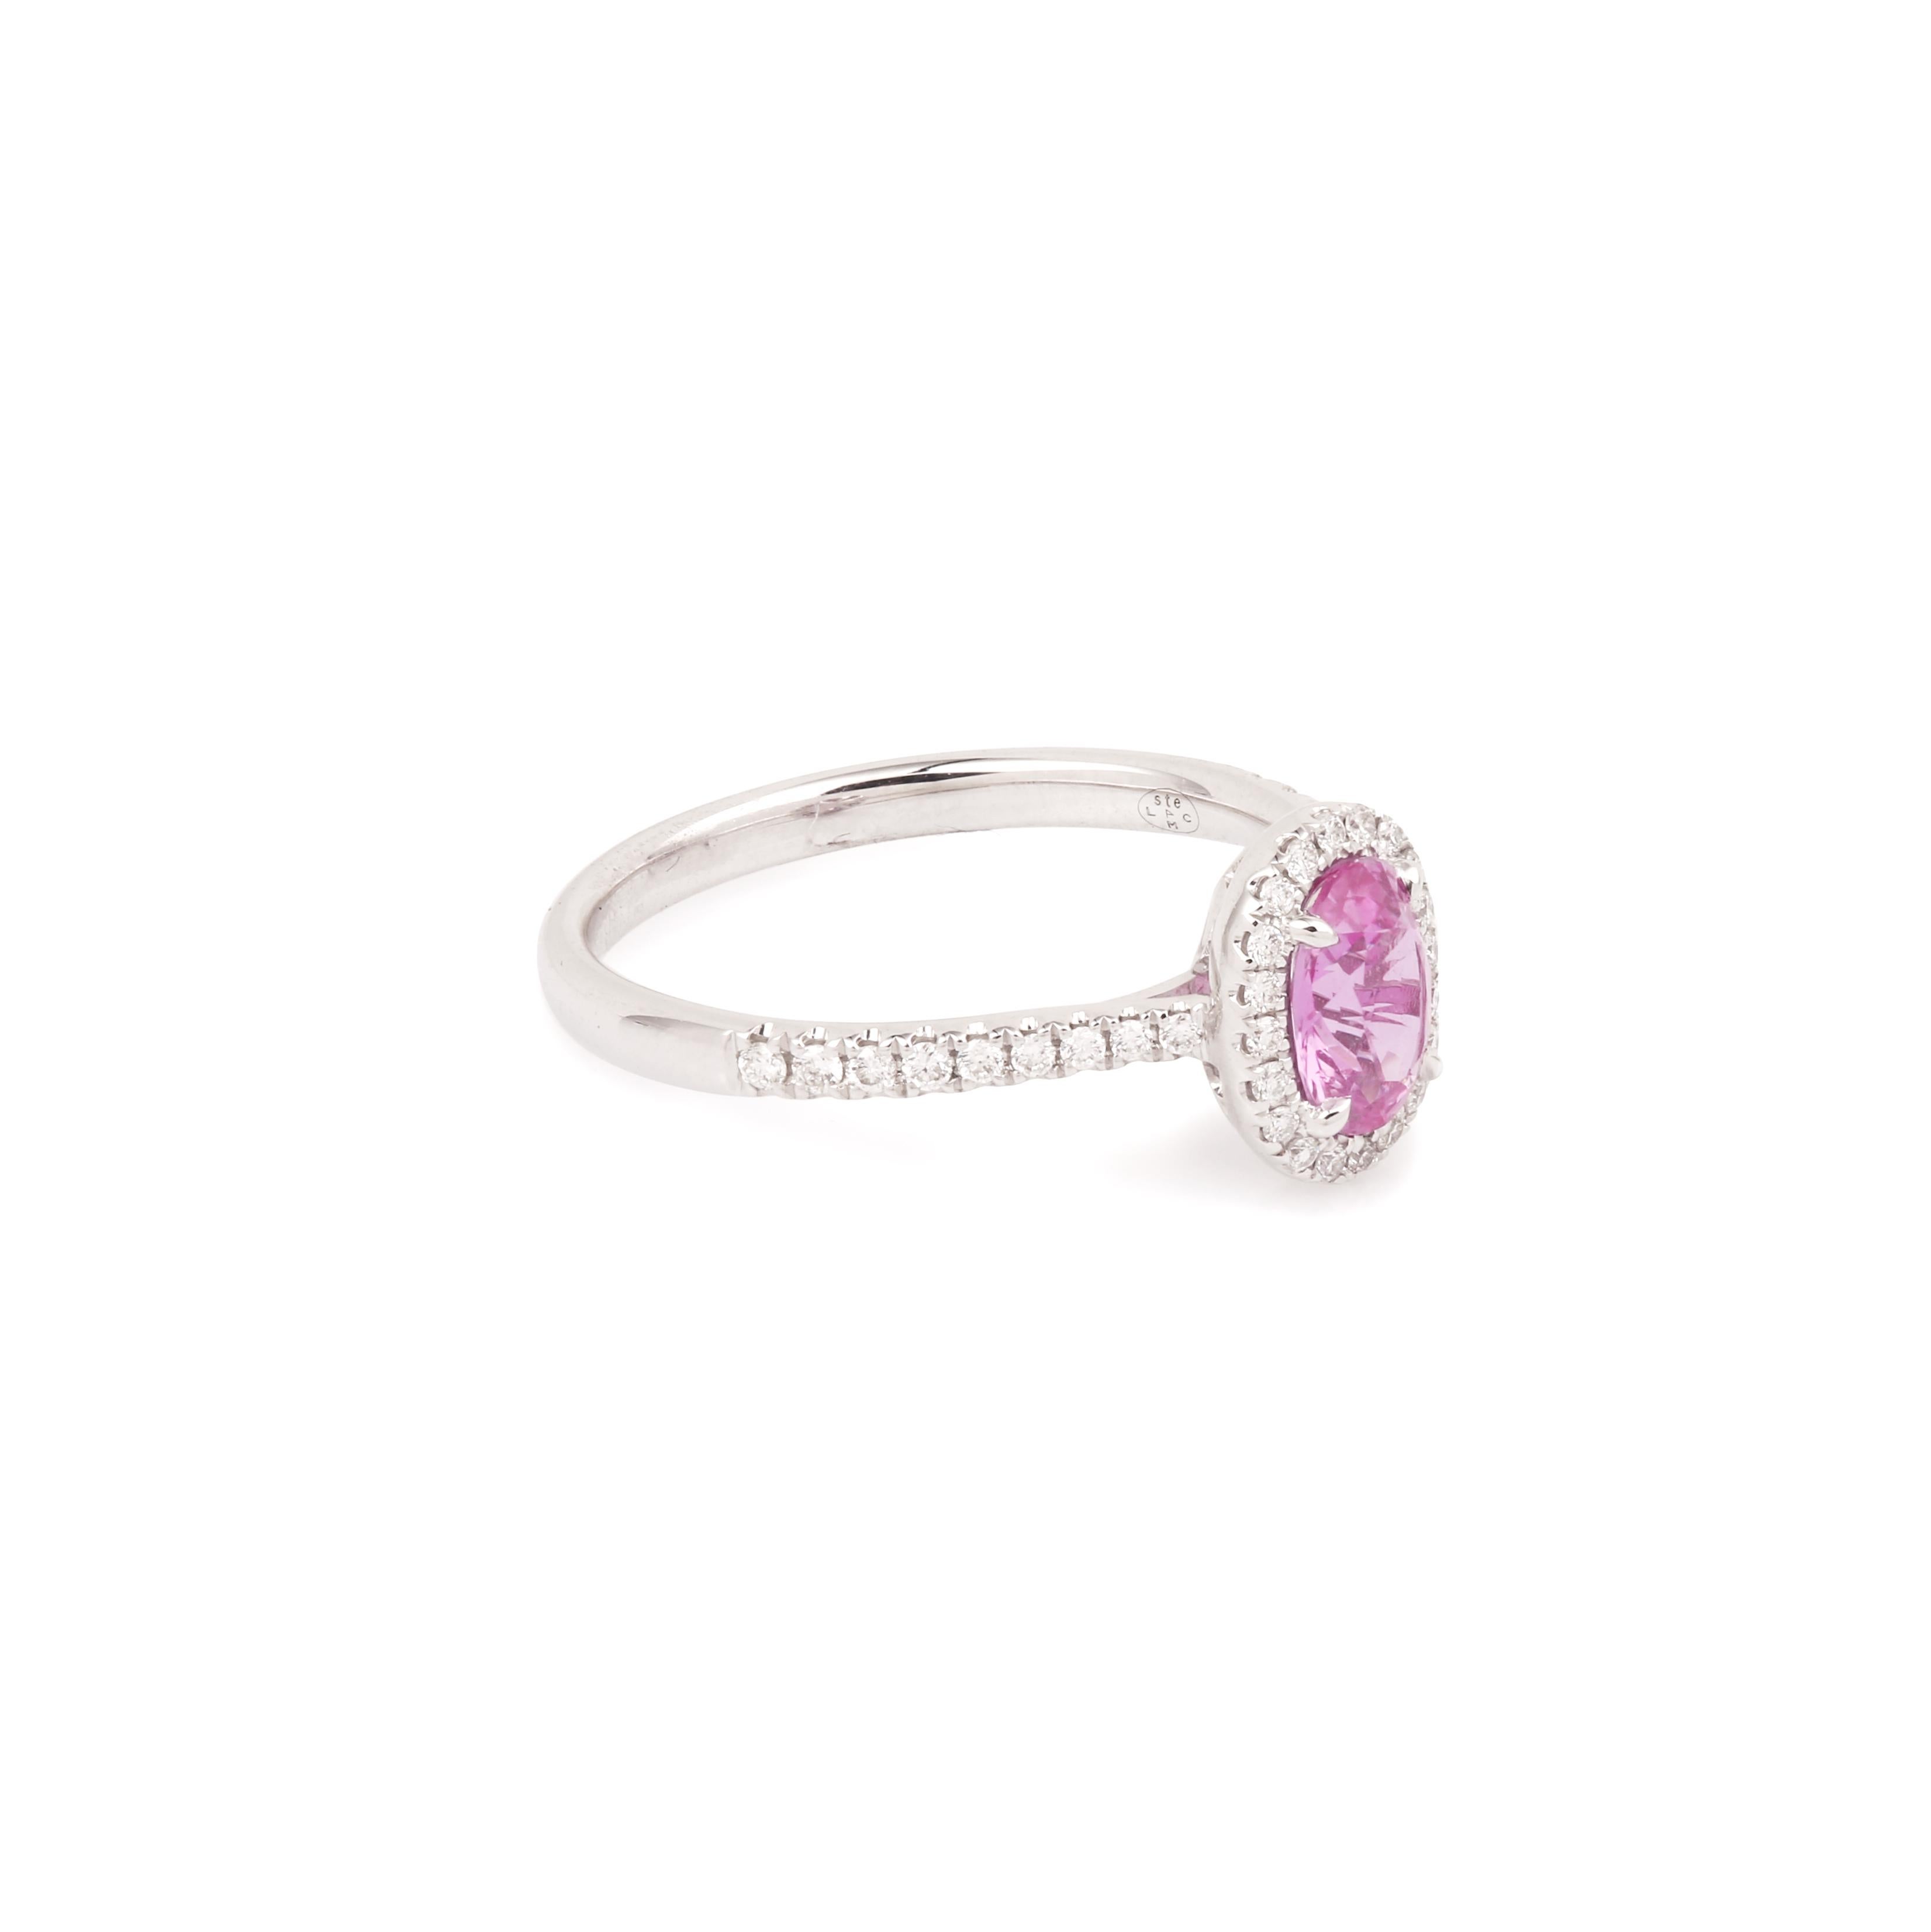 Delightful white gold pompadour ring set with an oval pink sapphire in a diamond setting.

For those of you who seek a little originality and an alternative to the blue color, why not let yourself be tempted by a pretty pink sapphire!

Pink sapphire